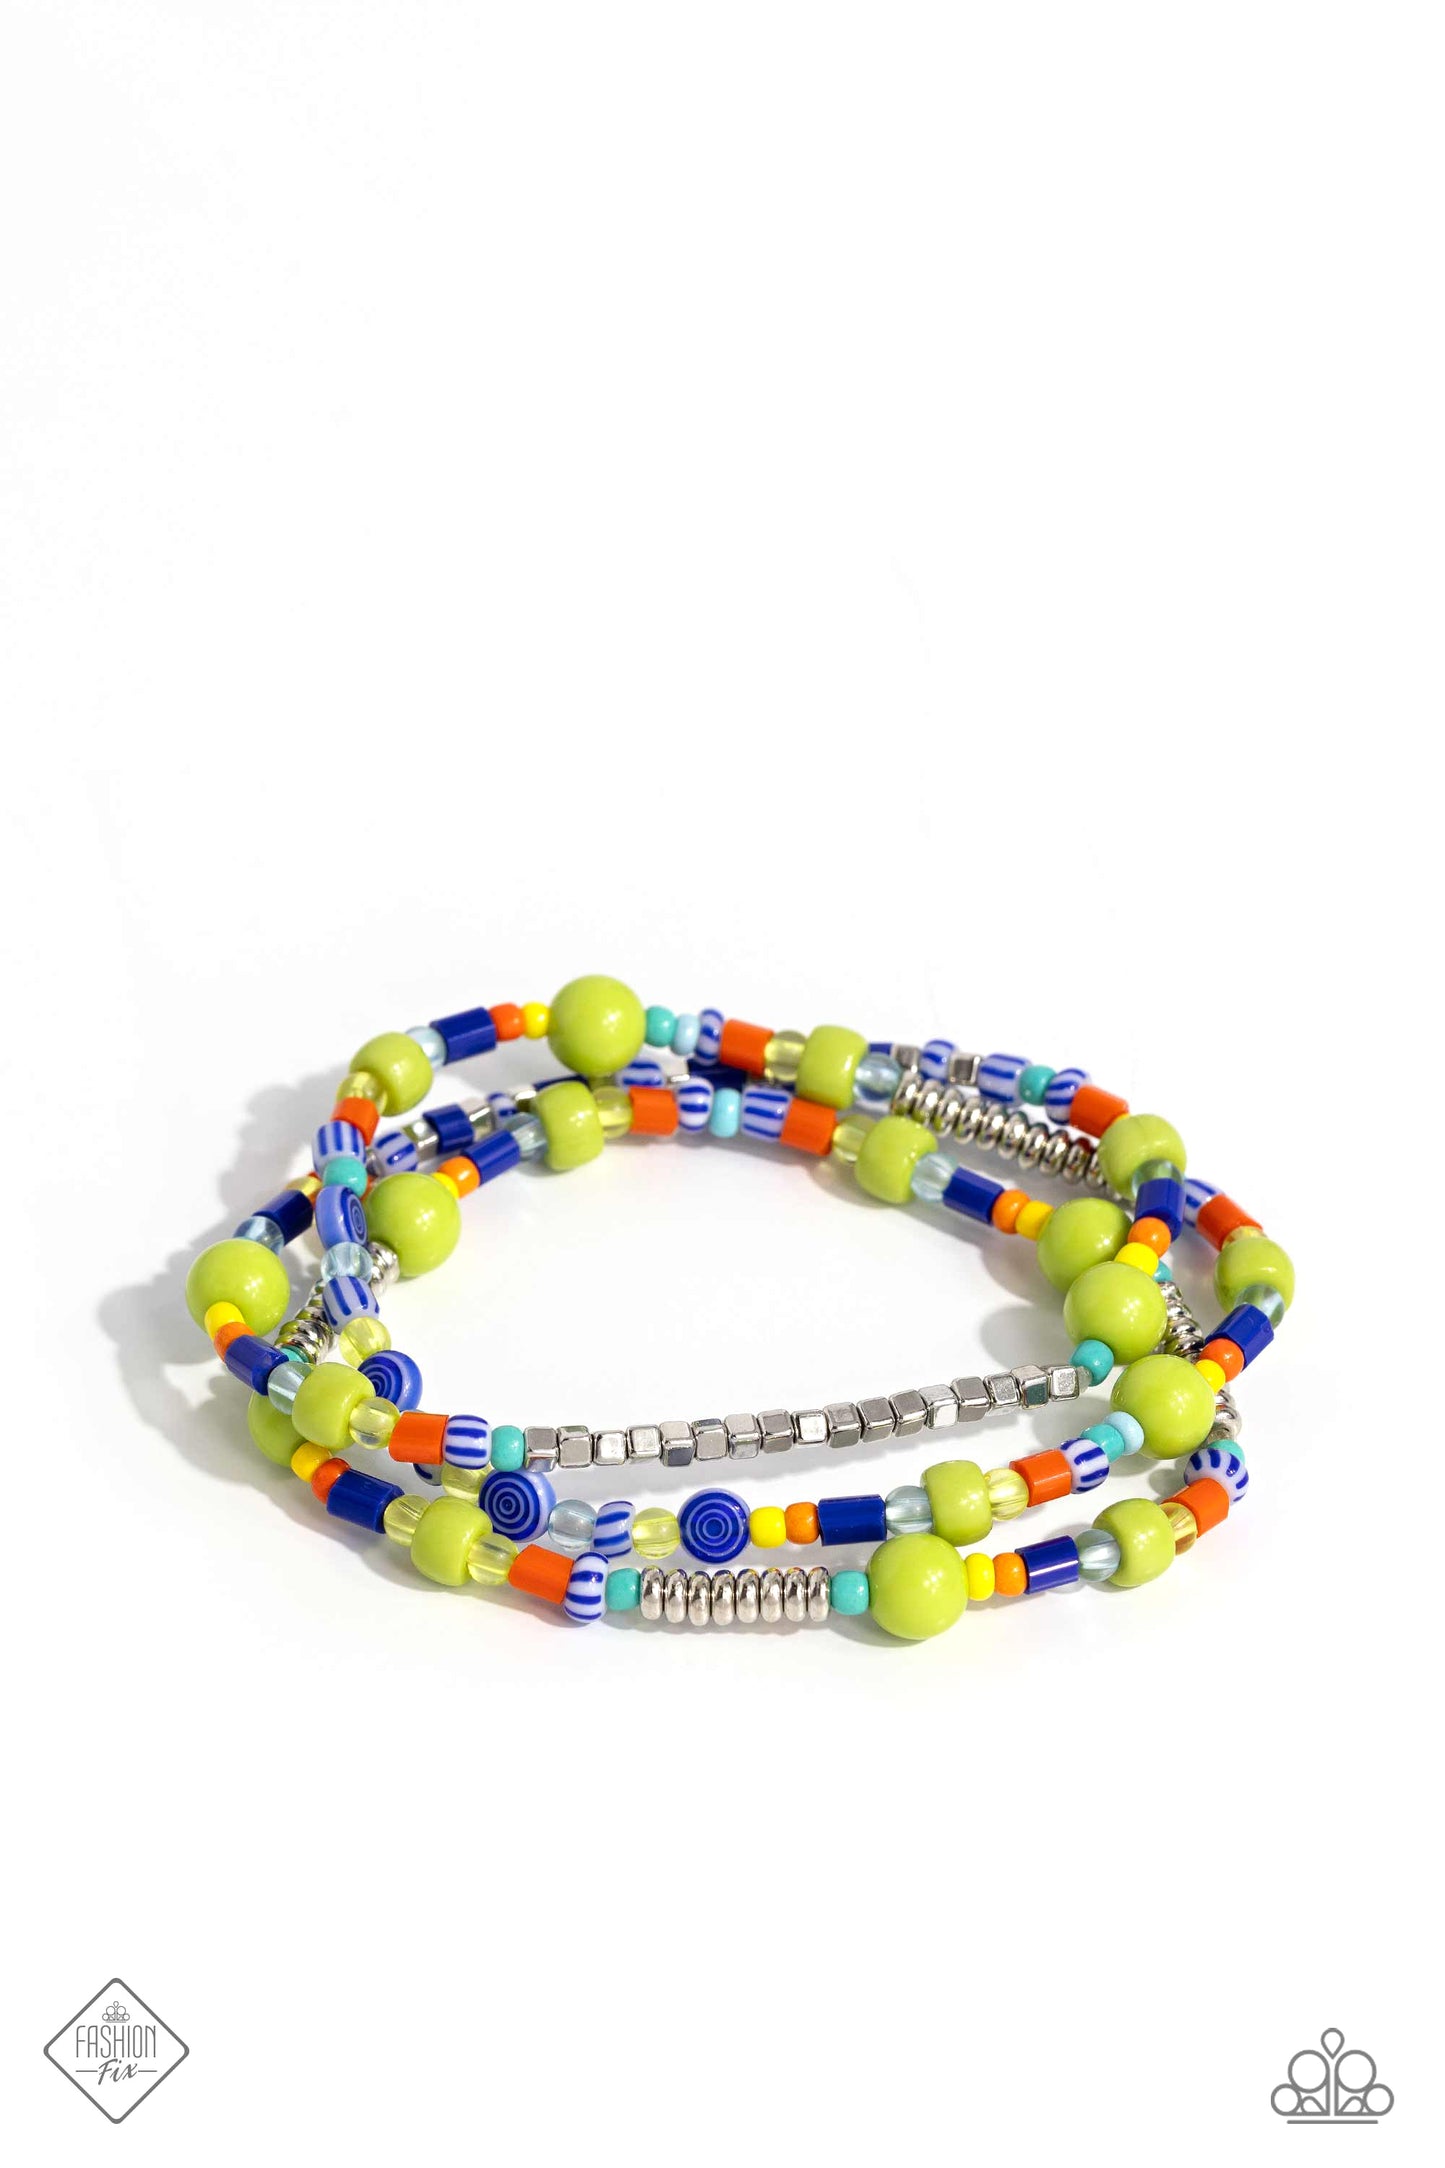 Awesome Seed Bead Jewelry Set With Colorful Accents - Fashion Fix - Collision